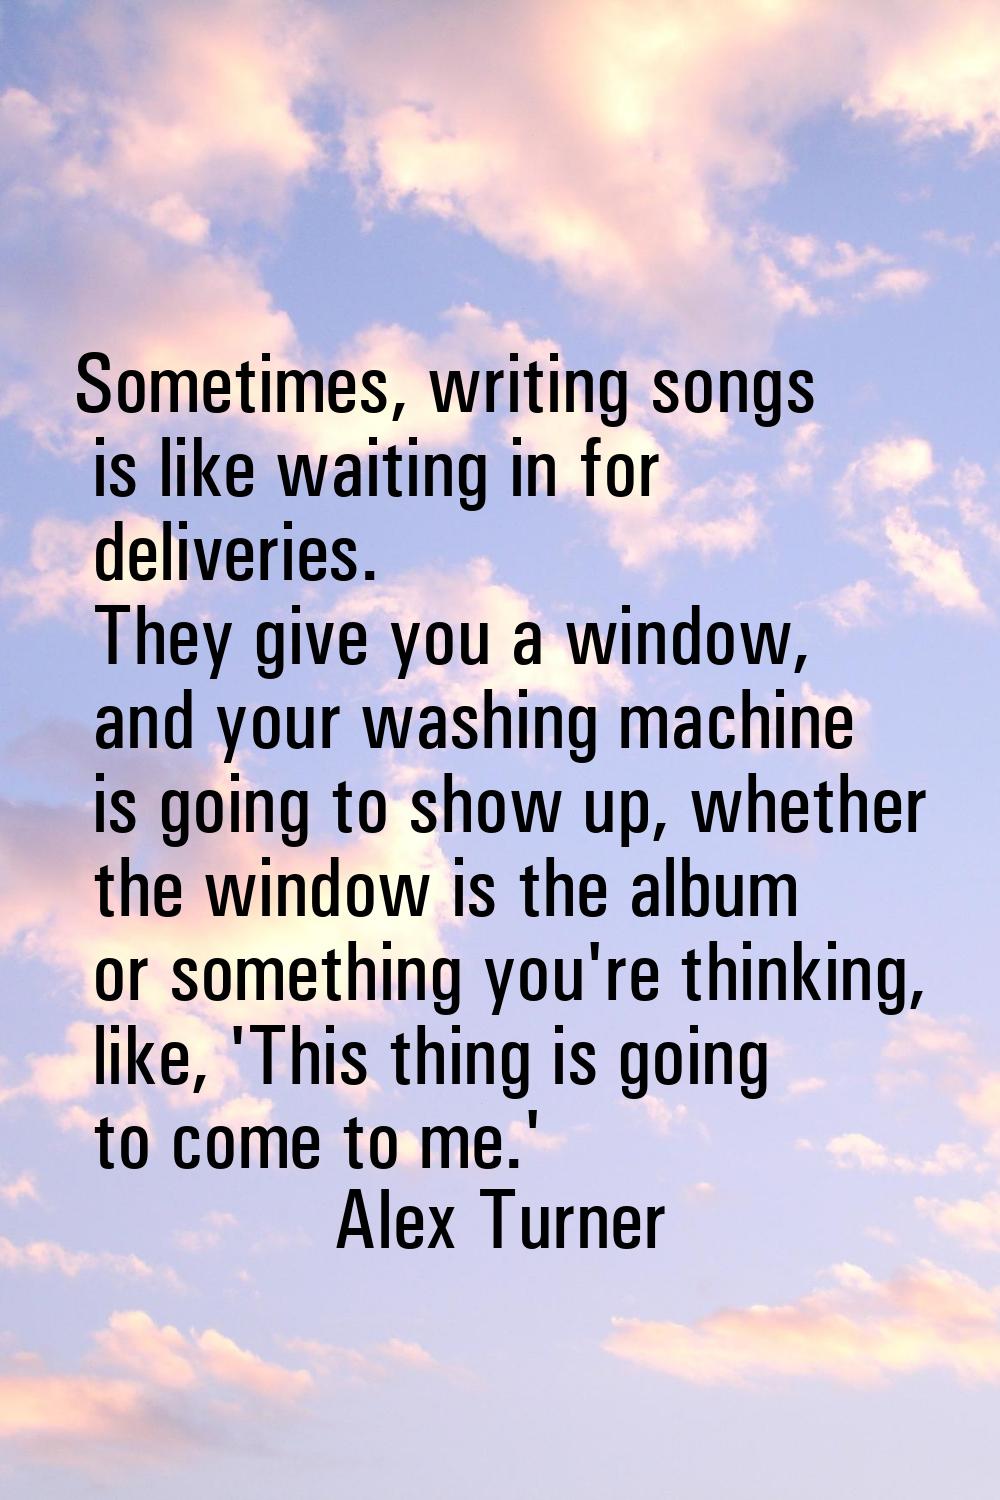 Sometimes, writing songs is like waiting in for deliveries. They give you a window, and your washin